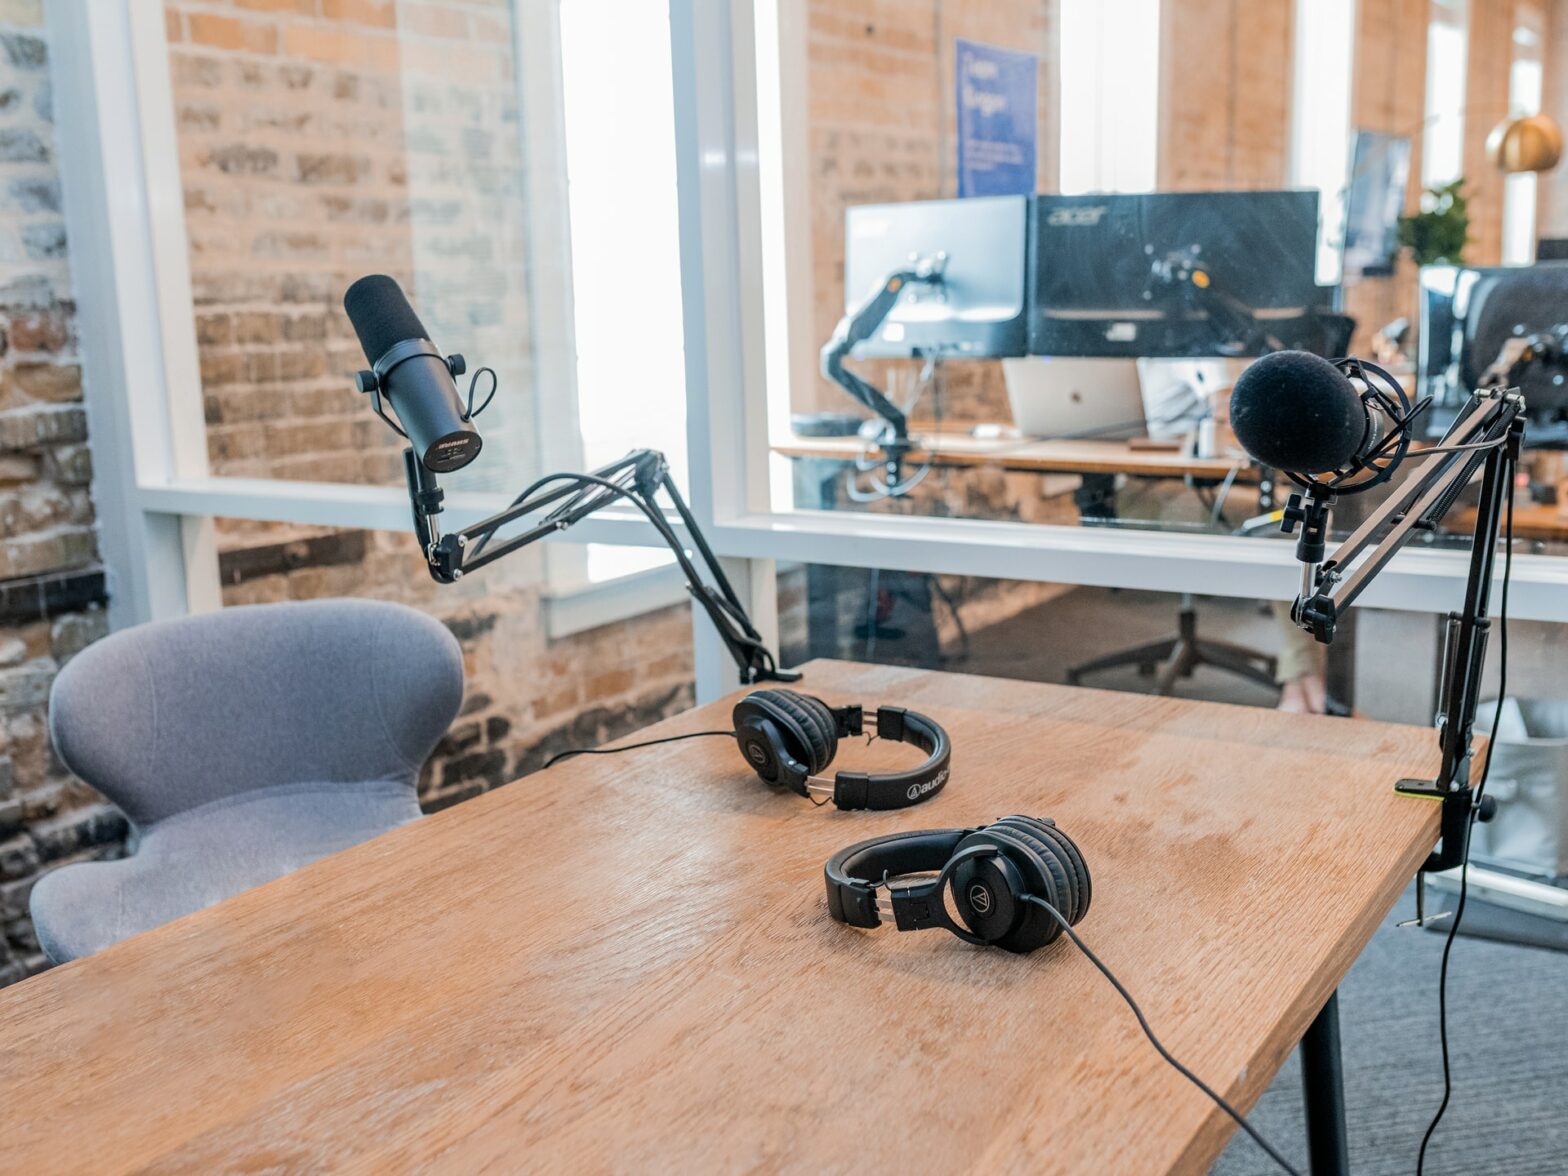 Podcast studio with mic on table